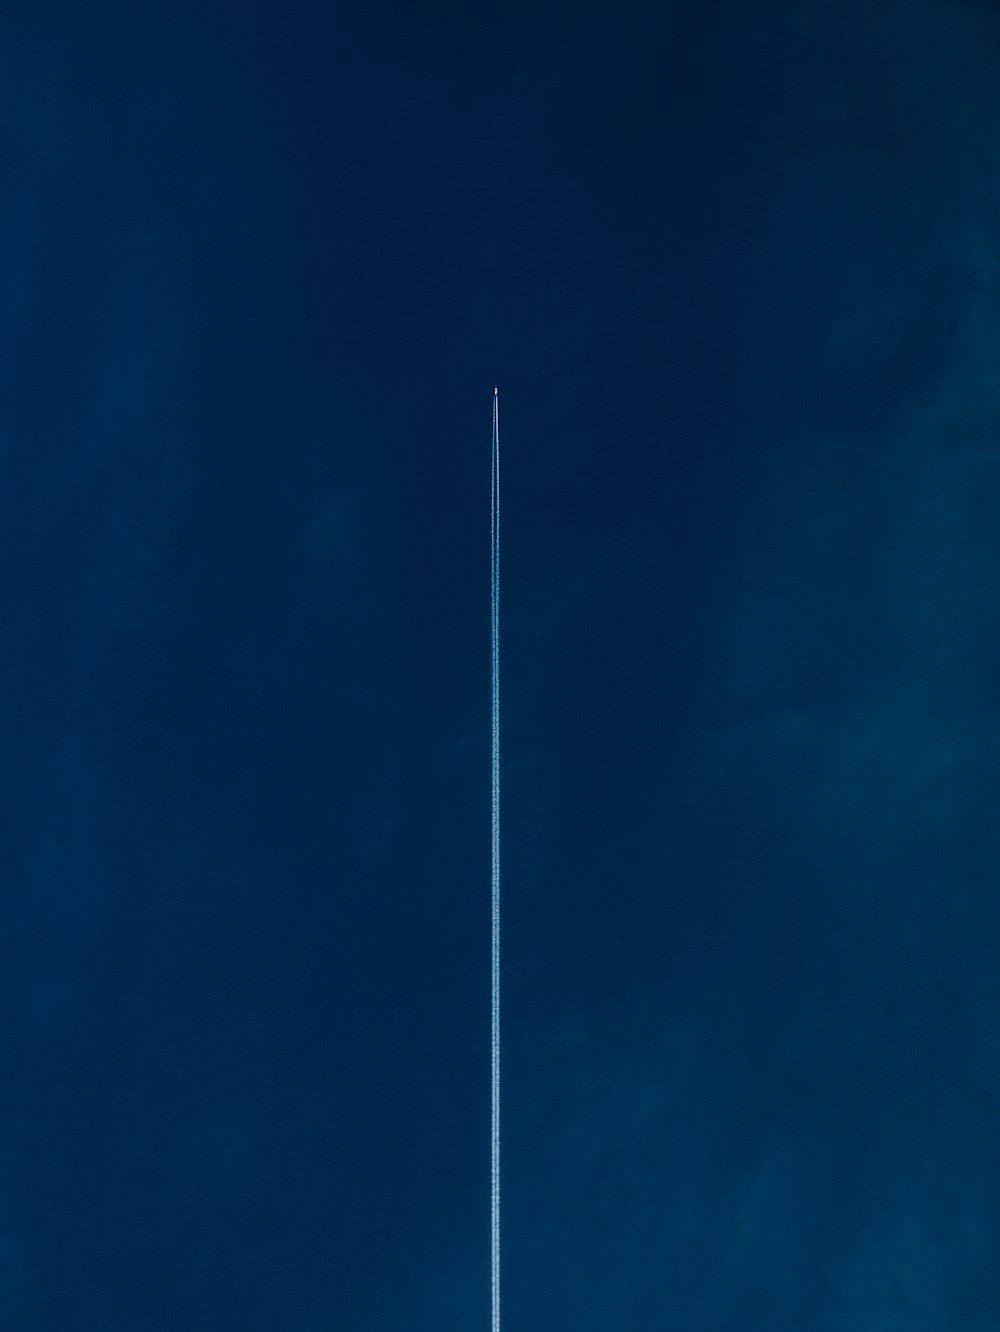 aircraft with line of air on blue sky